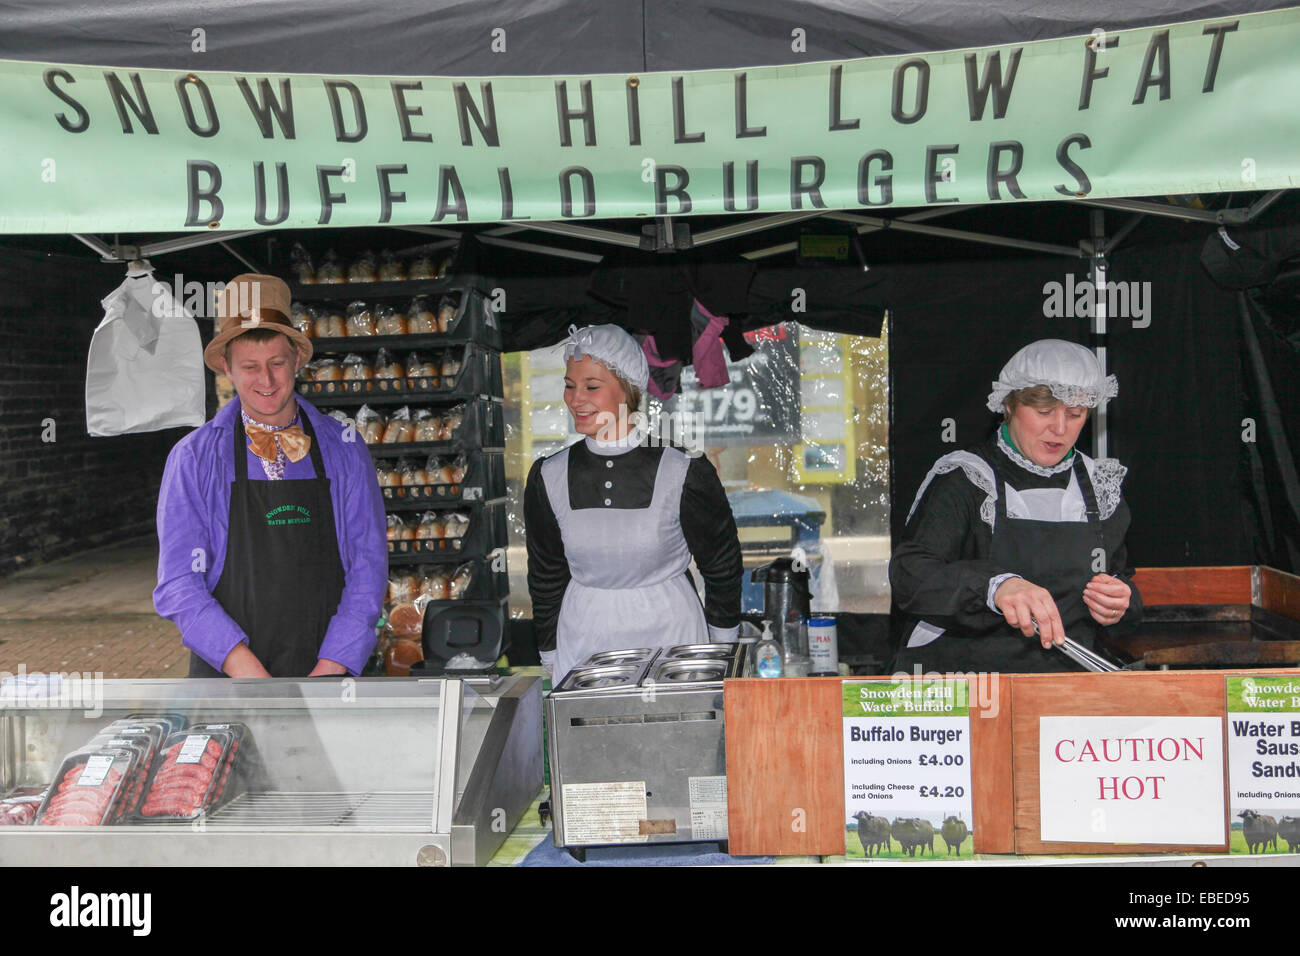 Brighouse, West Yorkshire, United Kingdom. November 29th, 2014. Victorian Christmas market.Vendors in period costume selling snowden hill low fat buffalo burgers. Stock Photo